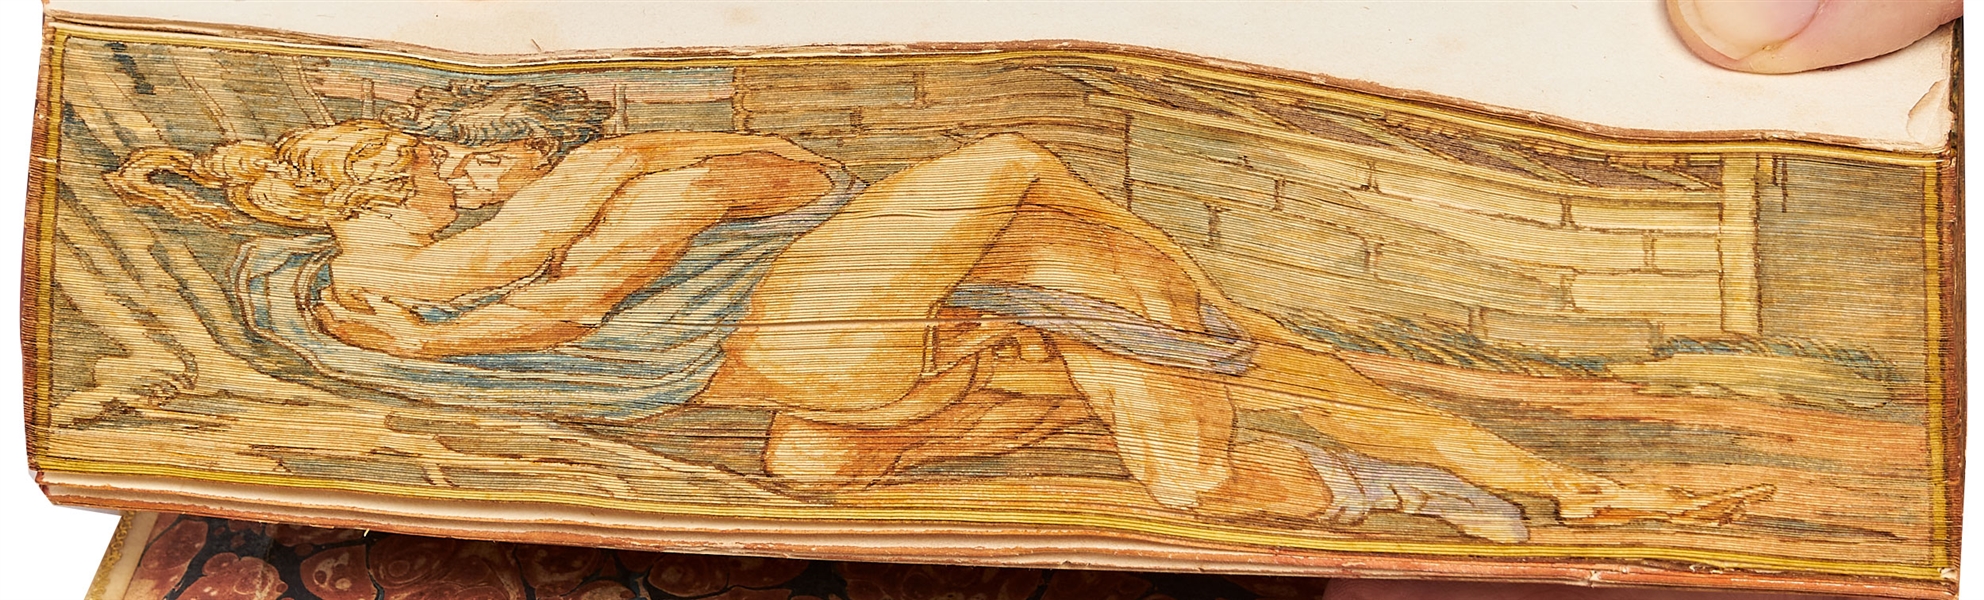 Triple Fore-Edge Paintings of Sensual Scenes in a 1810 Printing of ''The Lay of the Last Minstrel''